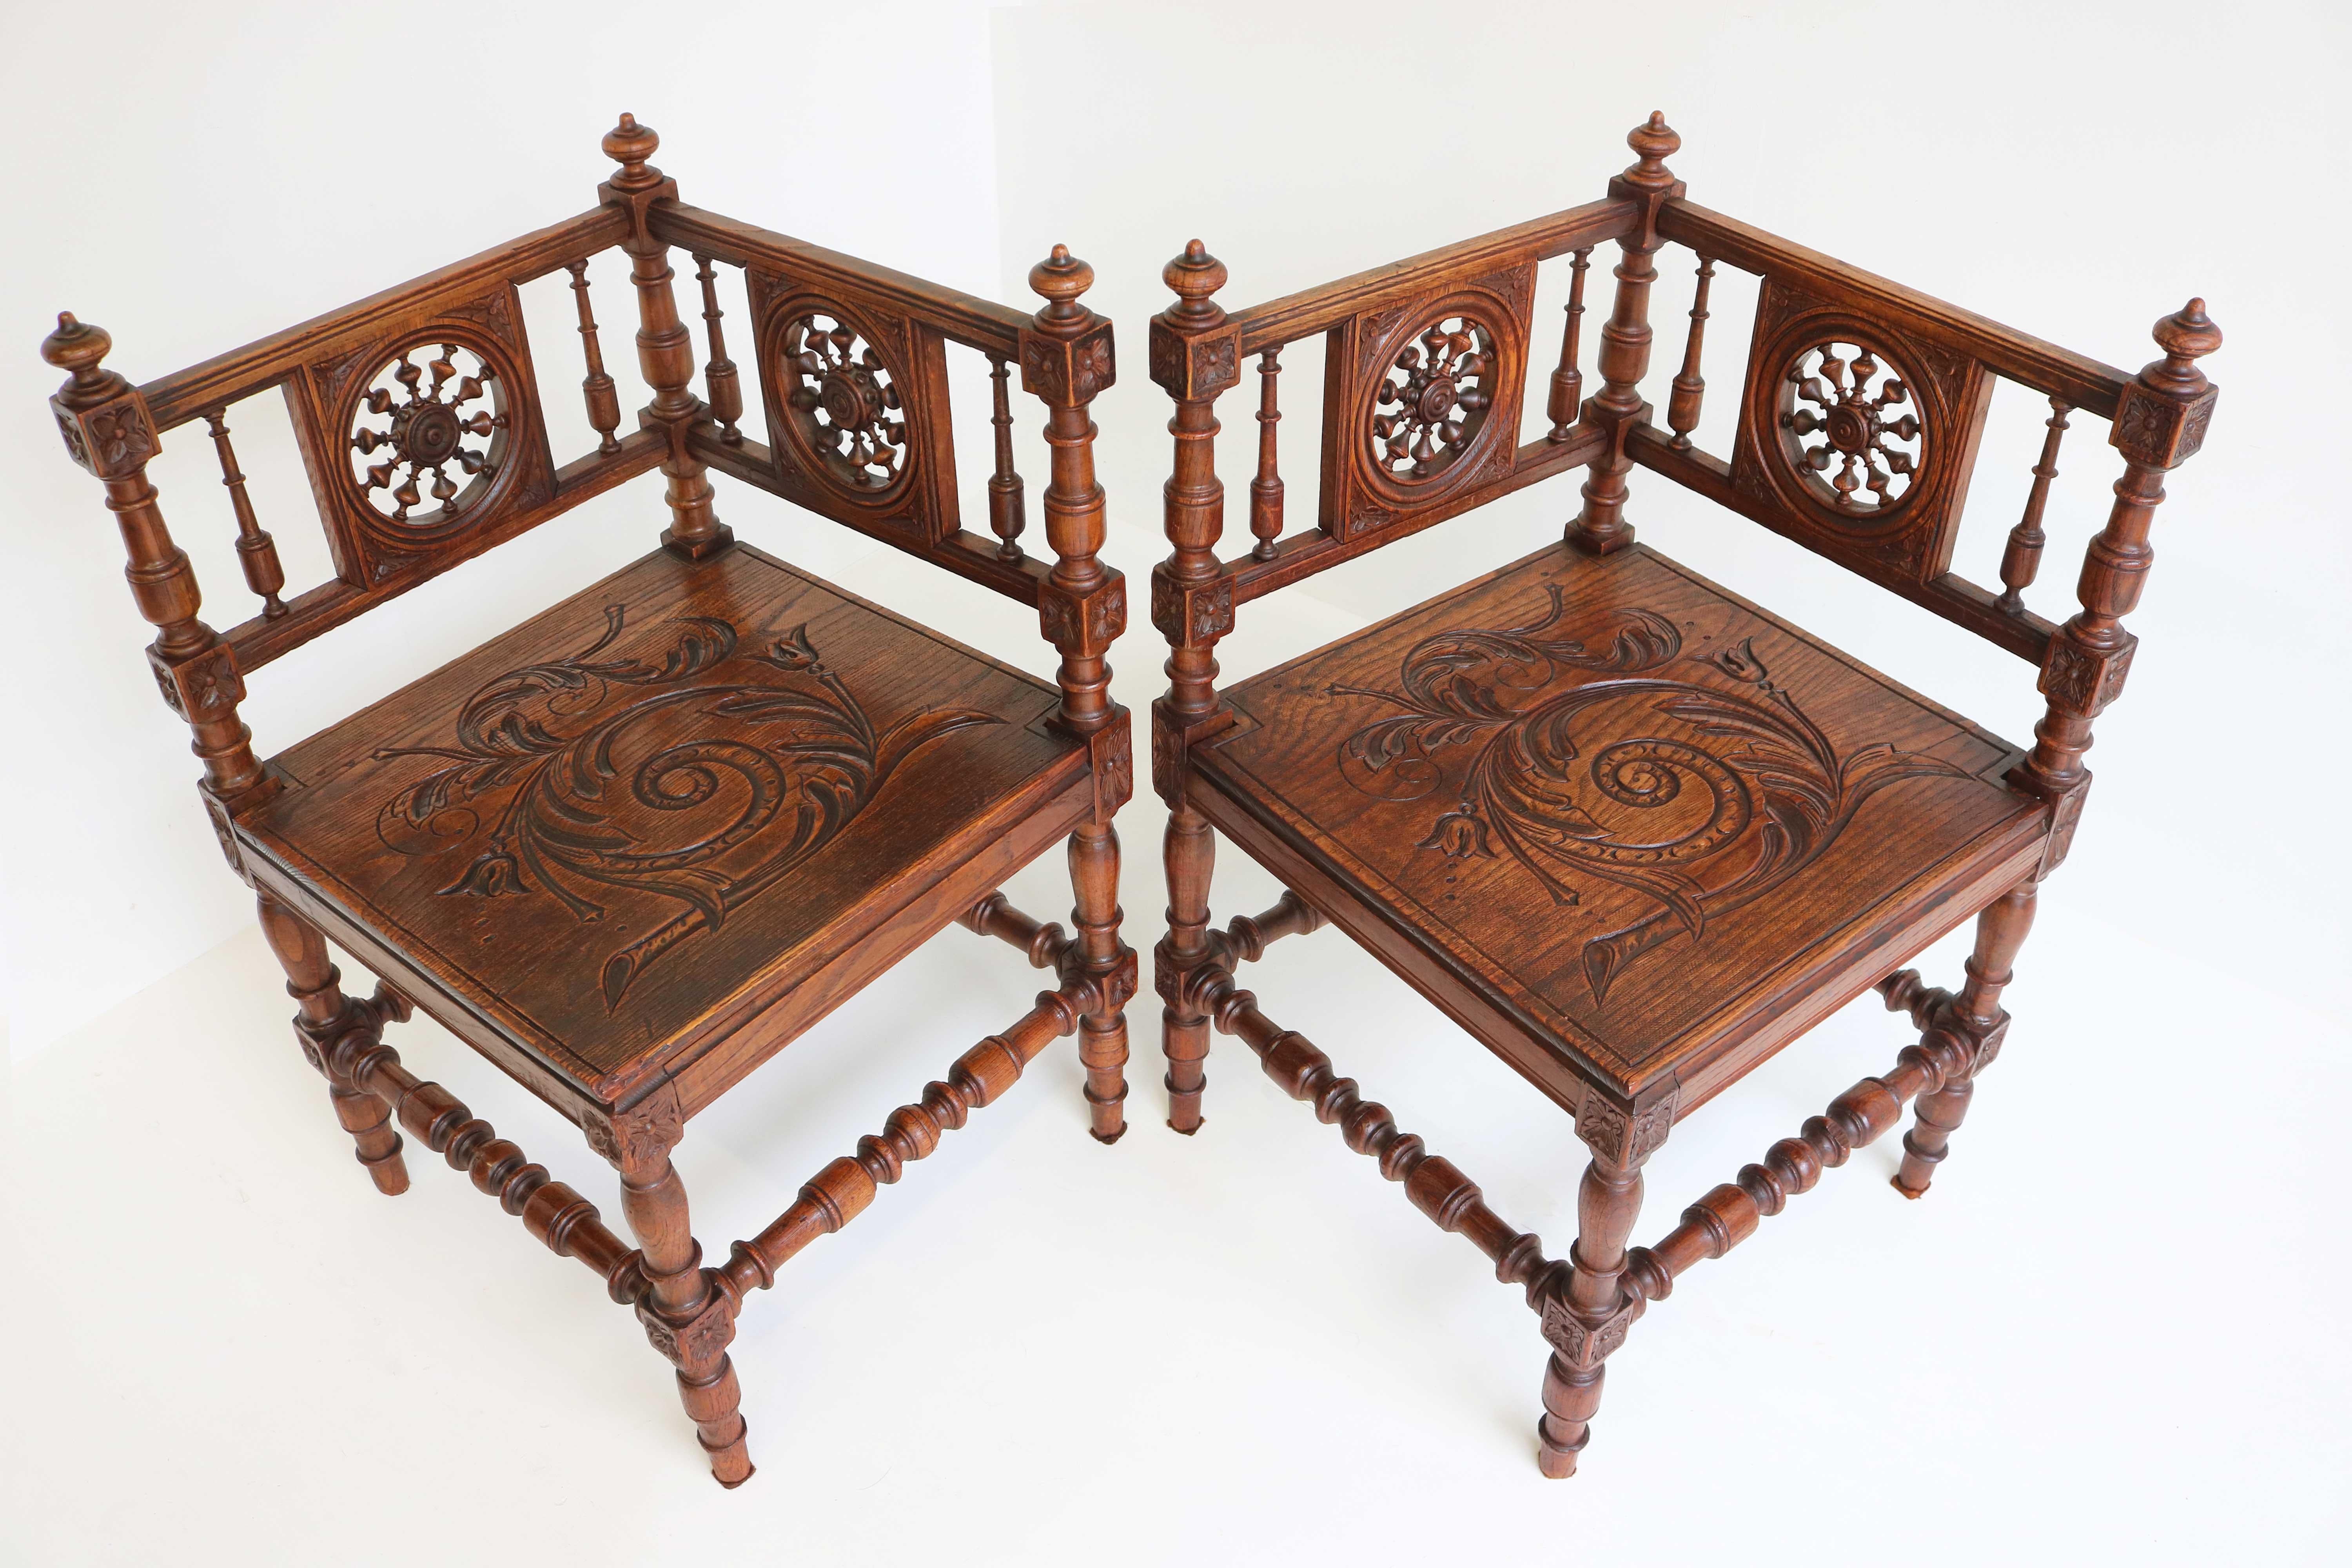 Pair of Breton Brittany renaissance revival corner armchairs in solid oak mid 19th century France. 
Two beautiful provincial style French antique corner chairs made of solid oak, with carved wooden seats, openwork wooden backrests with the